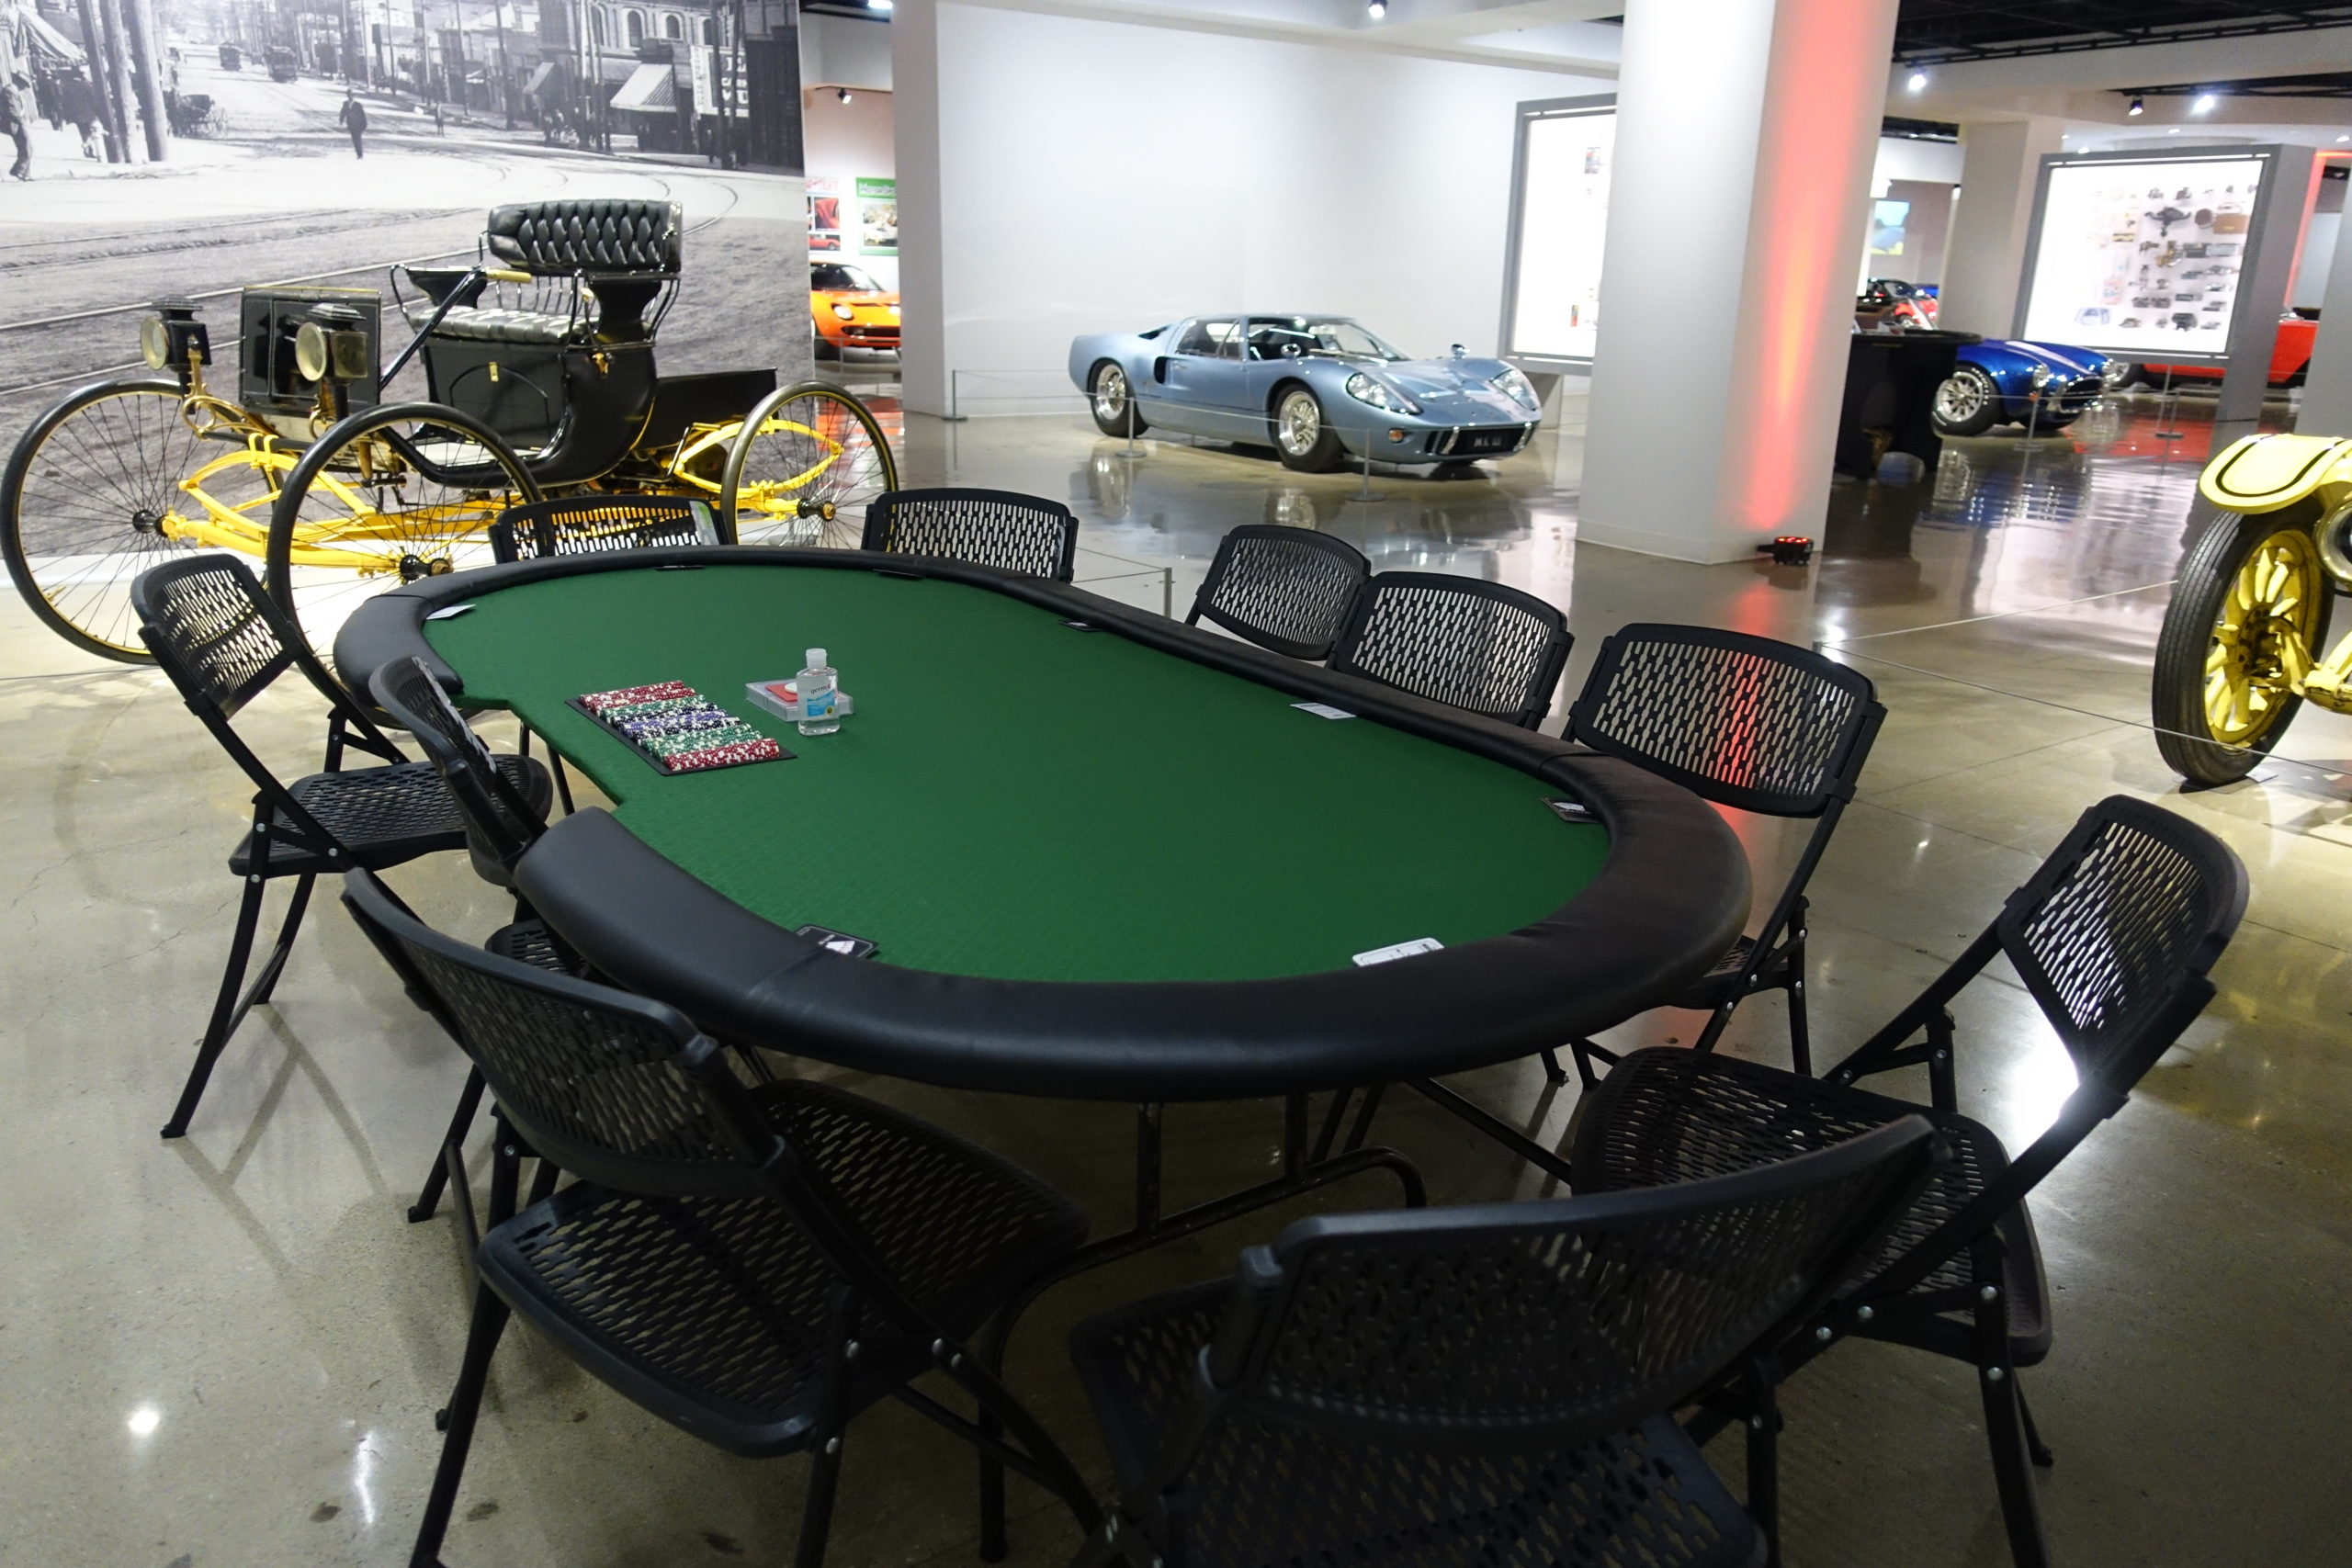 A Poker Table With Chairs At A Casino-themed Event